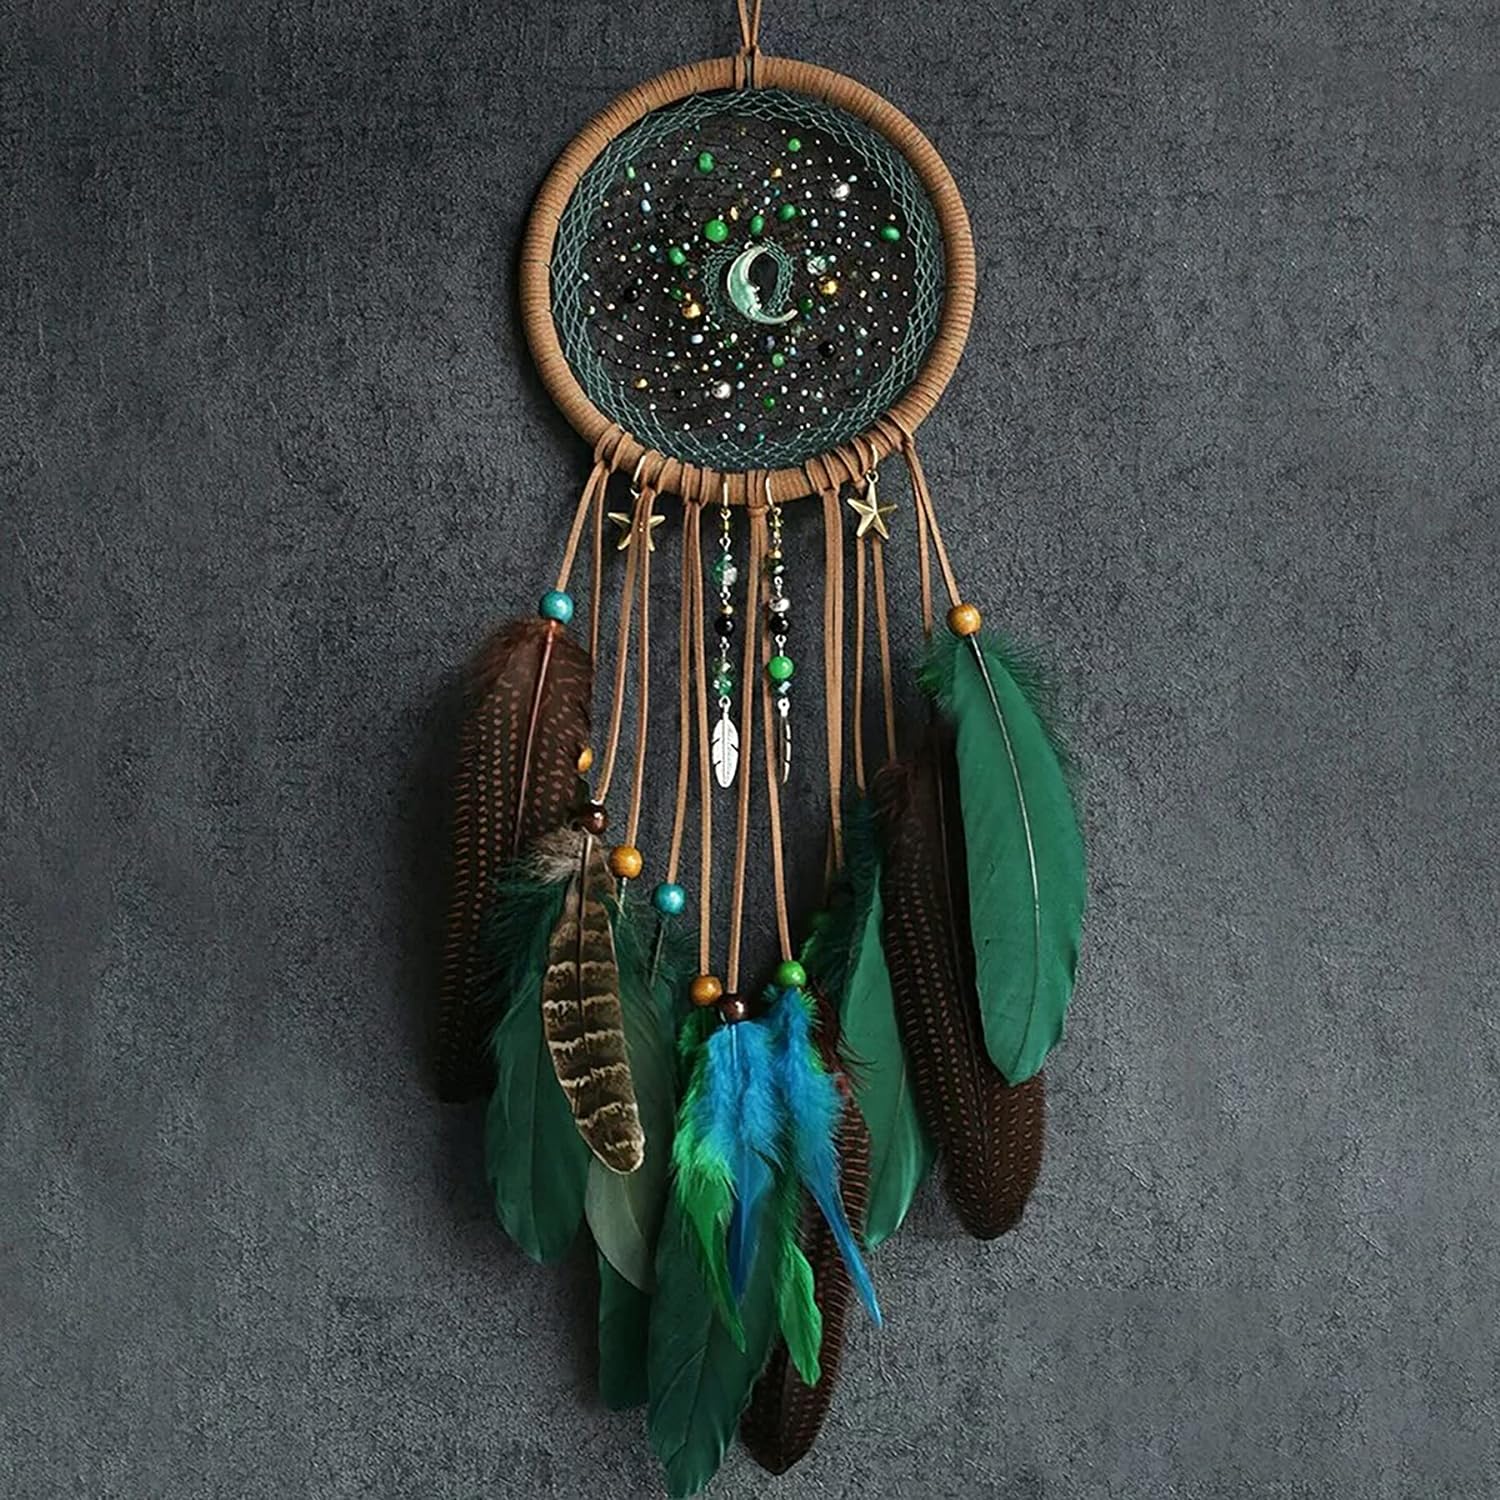 DIY Dream Catcher kit,Crafts for Adults,Moon Design Dream Catchers,Feather Hanging with Star and Moon.DIY Kits for Bedroom Wall Dcor,Directions Updated in 2022